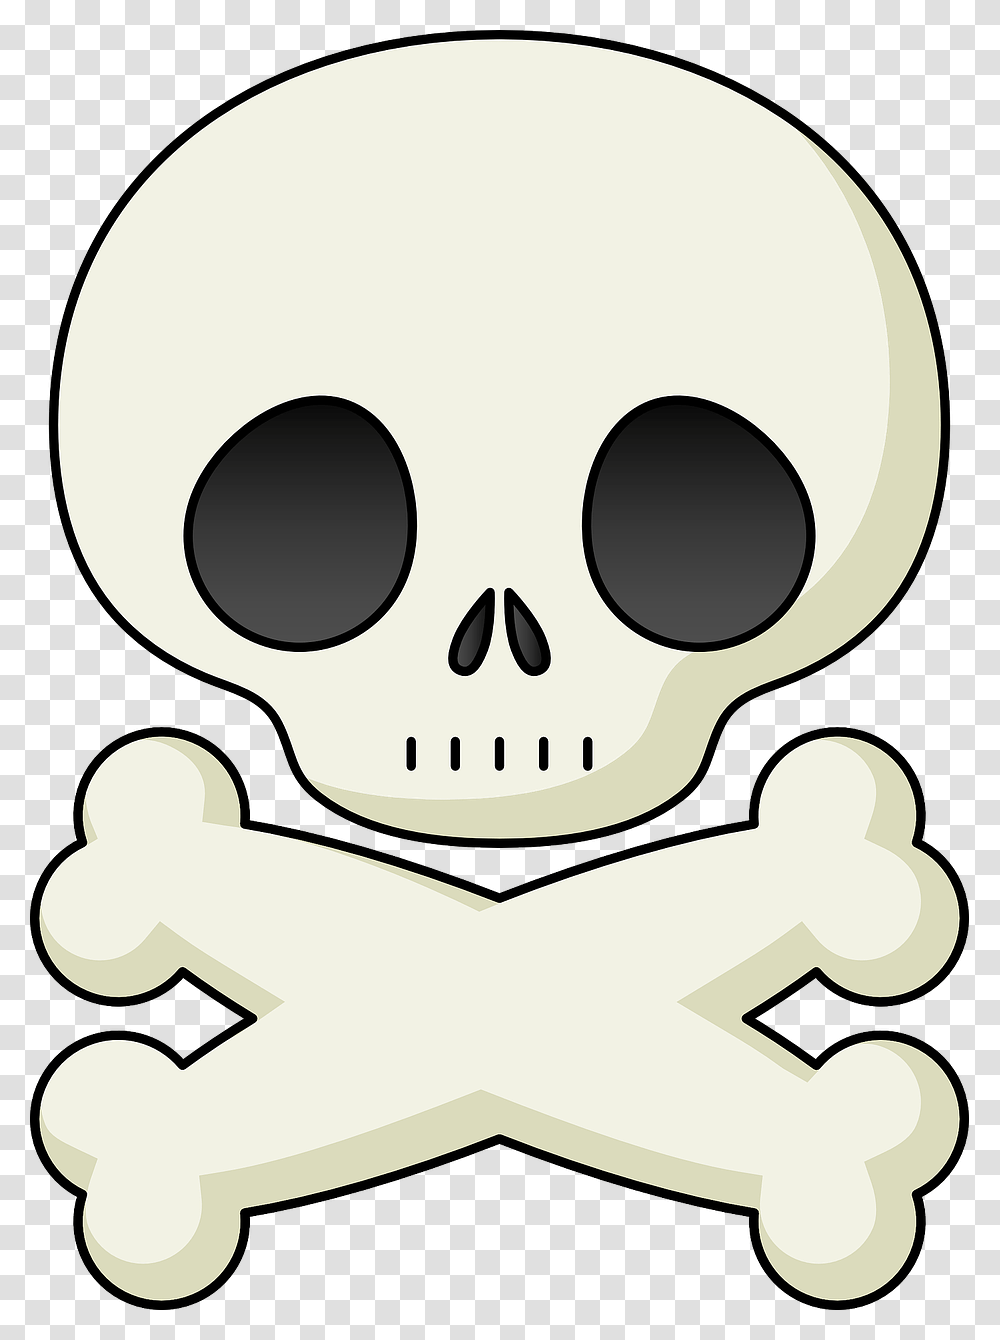 Lovely Skull And Bones Clippings Skull And Crossbones, Drawing, Art, Stencil, Doodle Transparent Png